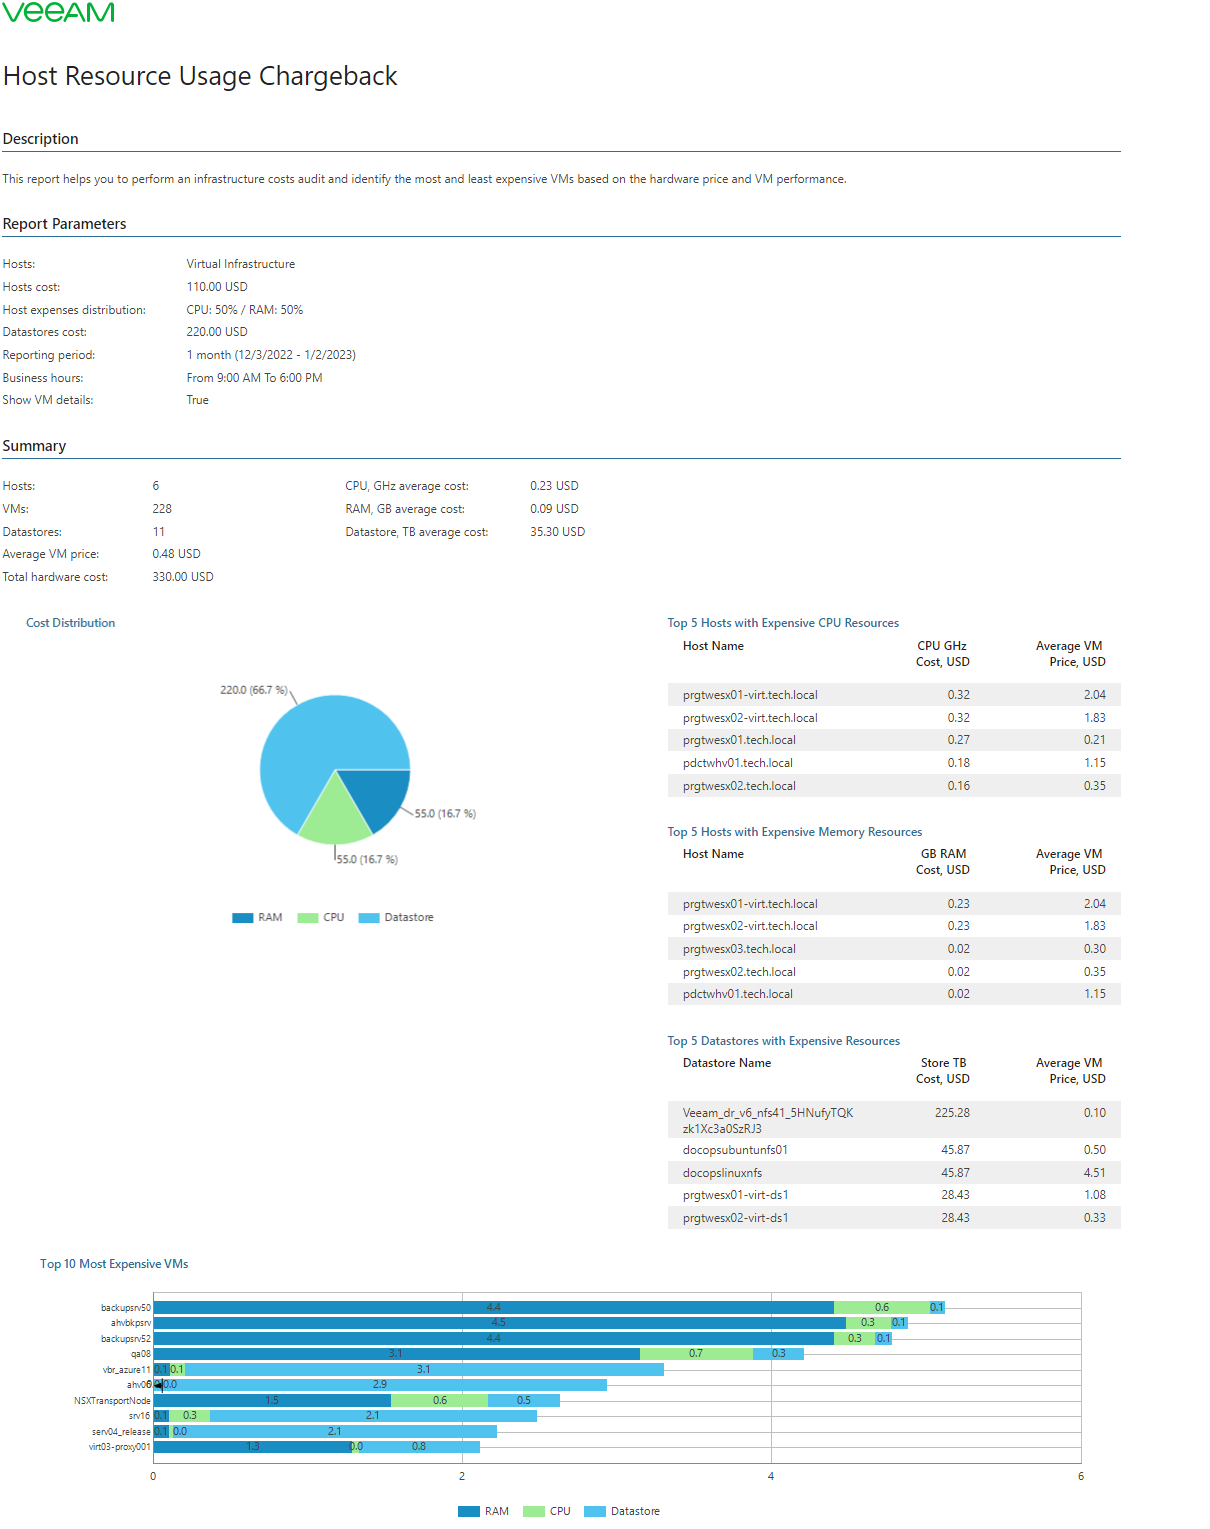 Host Resource Usage Chargeback Report